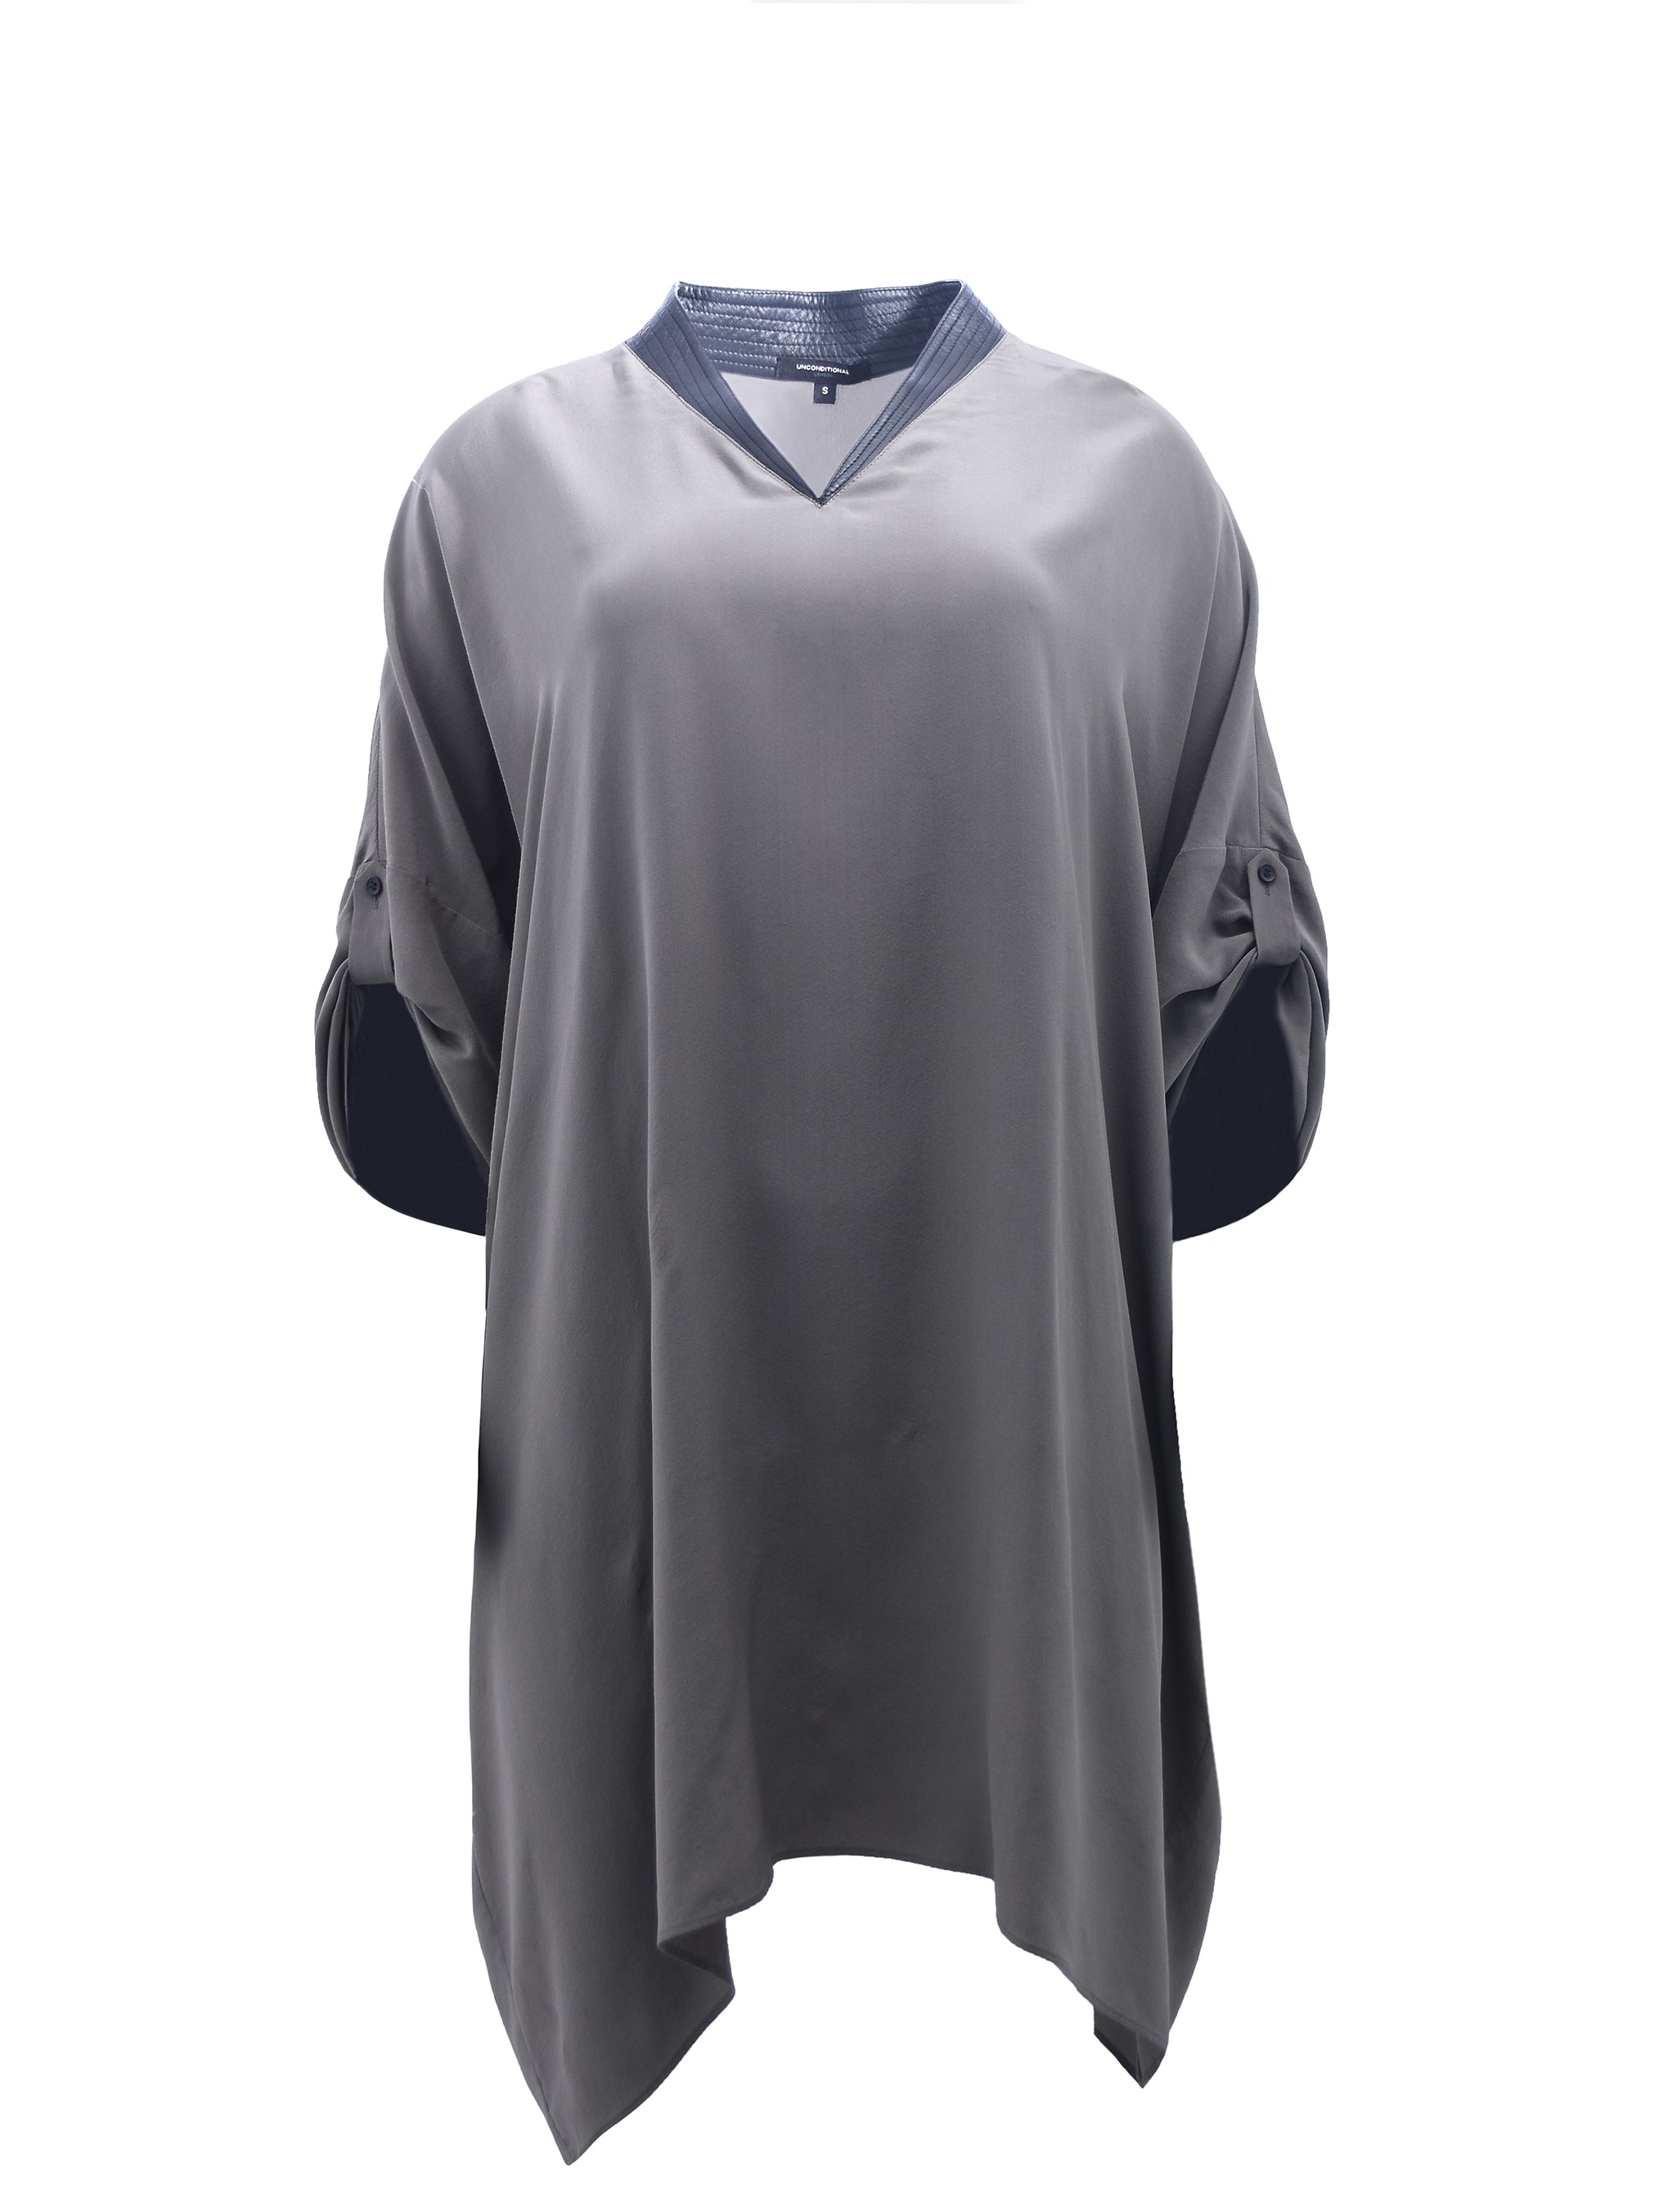 GREY AND BLACK SILK OVERSIZED TOP